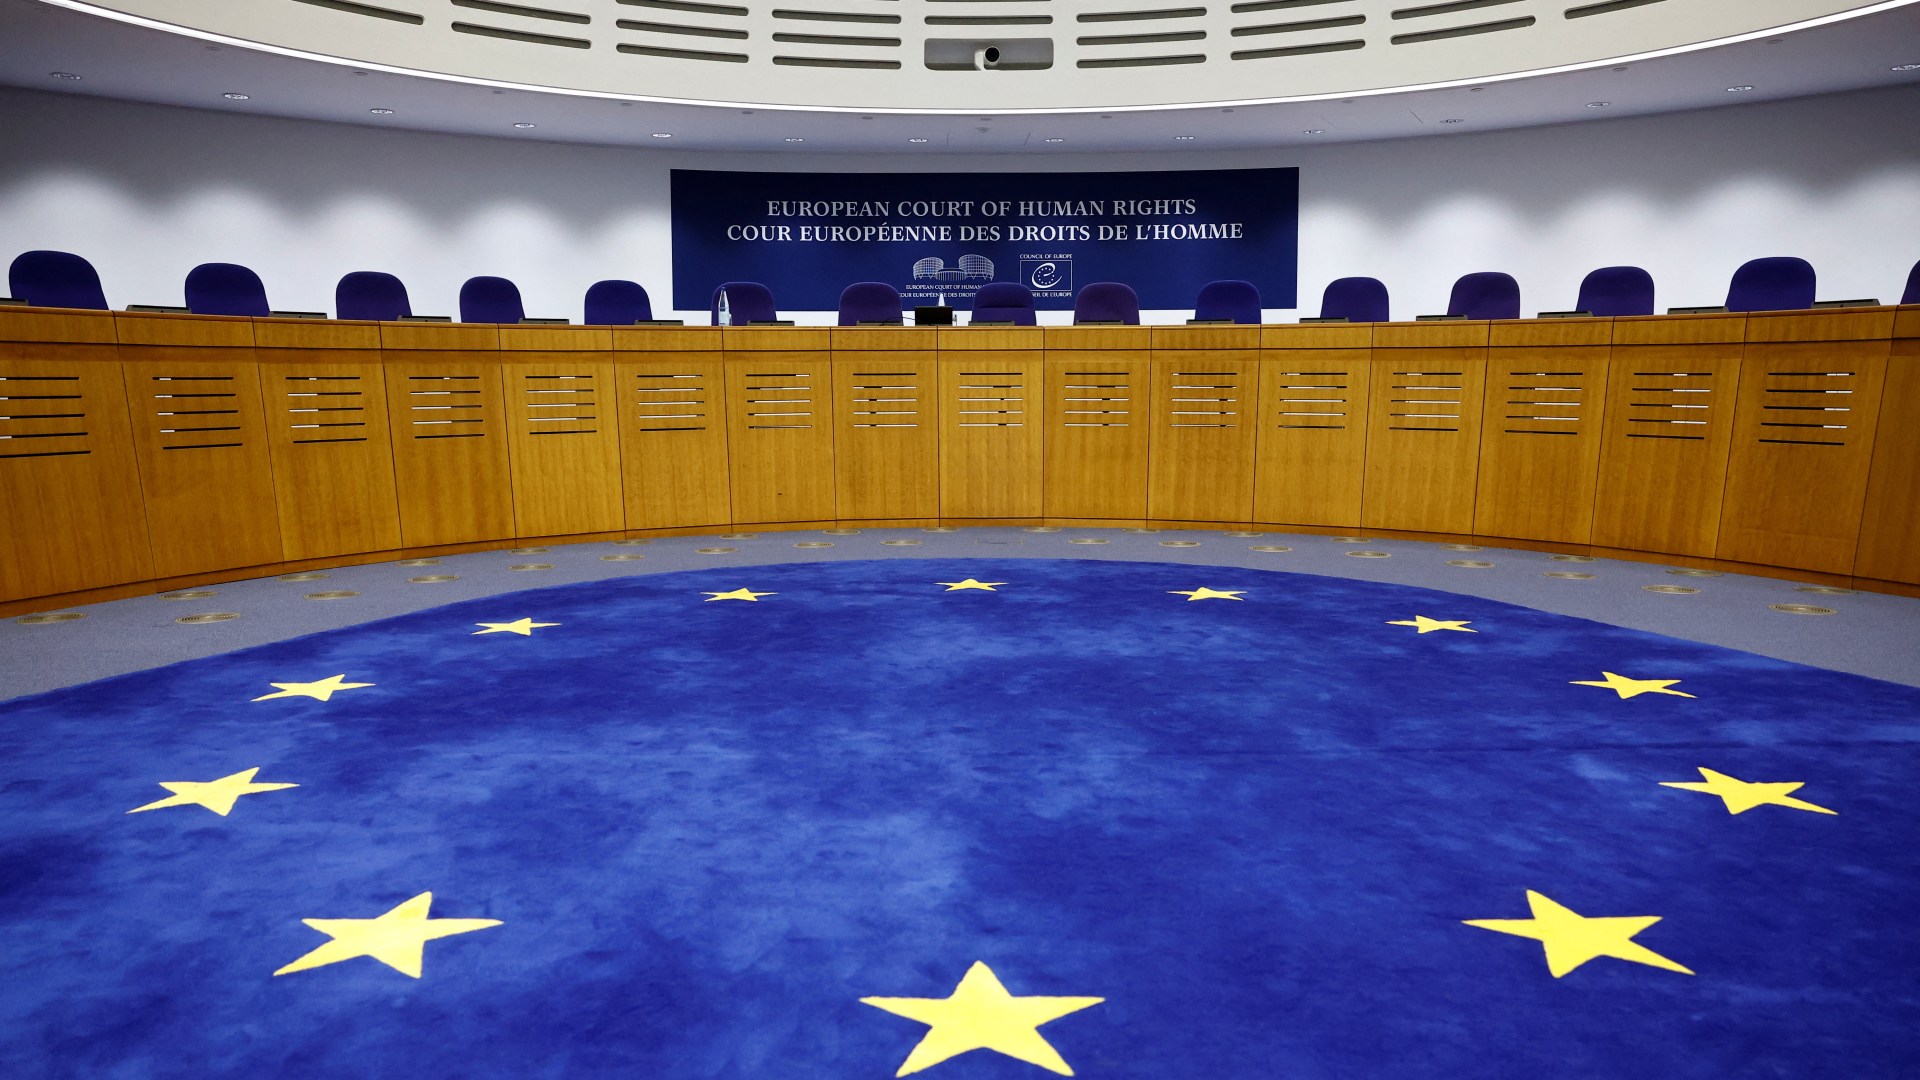 The creeping overreach of judges both at home and European Court of Human Rights is alarming [Video]